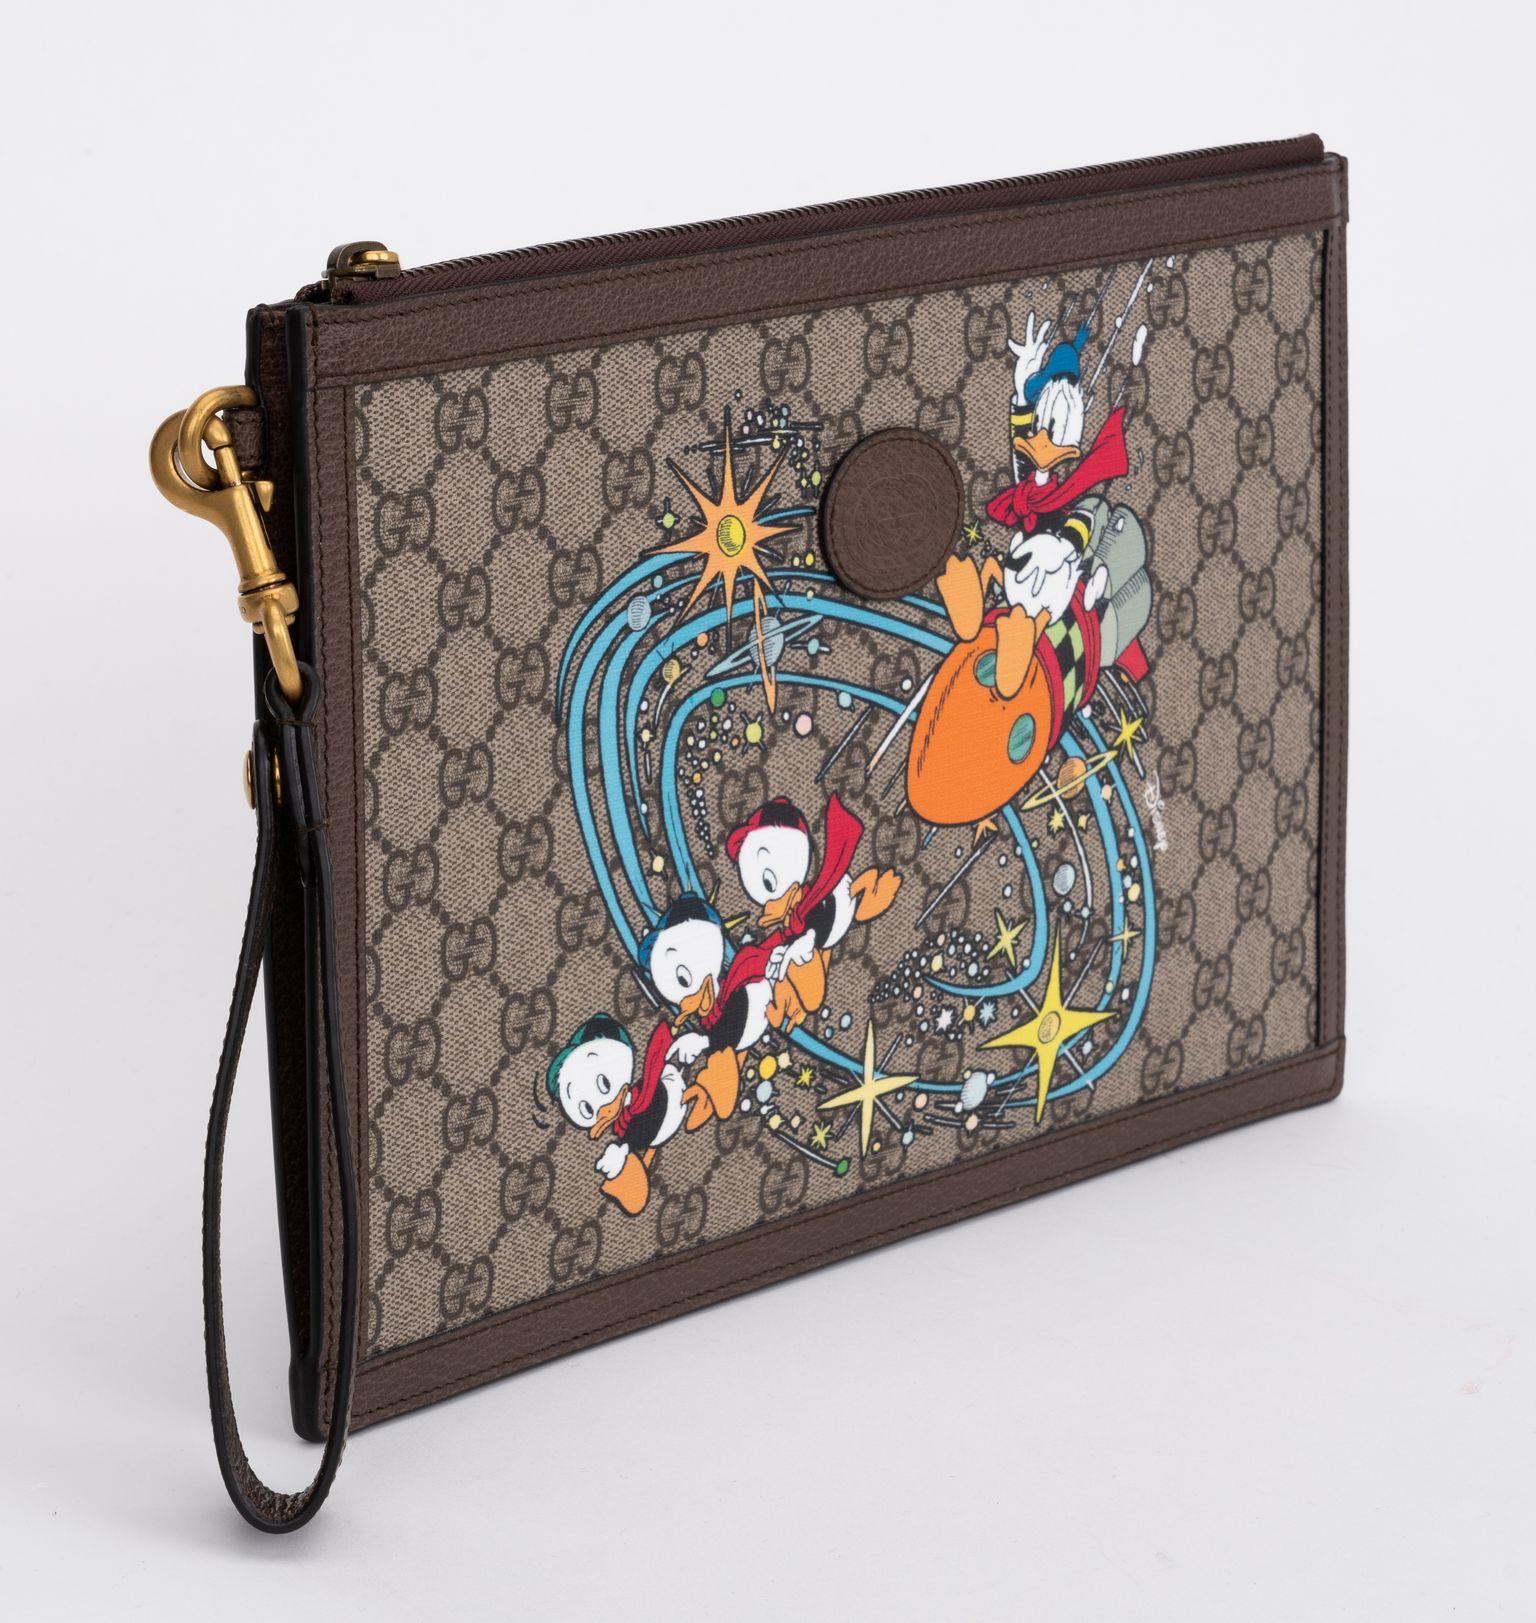 Gucci x Disney limited edition Donald Duck clutch. Detachable leather handle, comes with original booklets and dust cover.